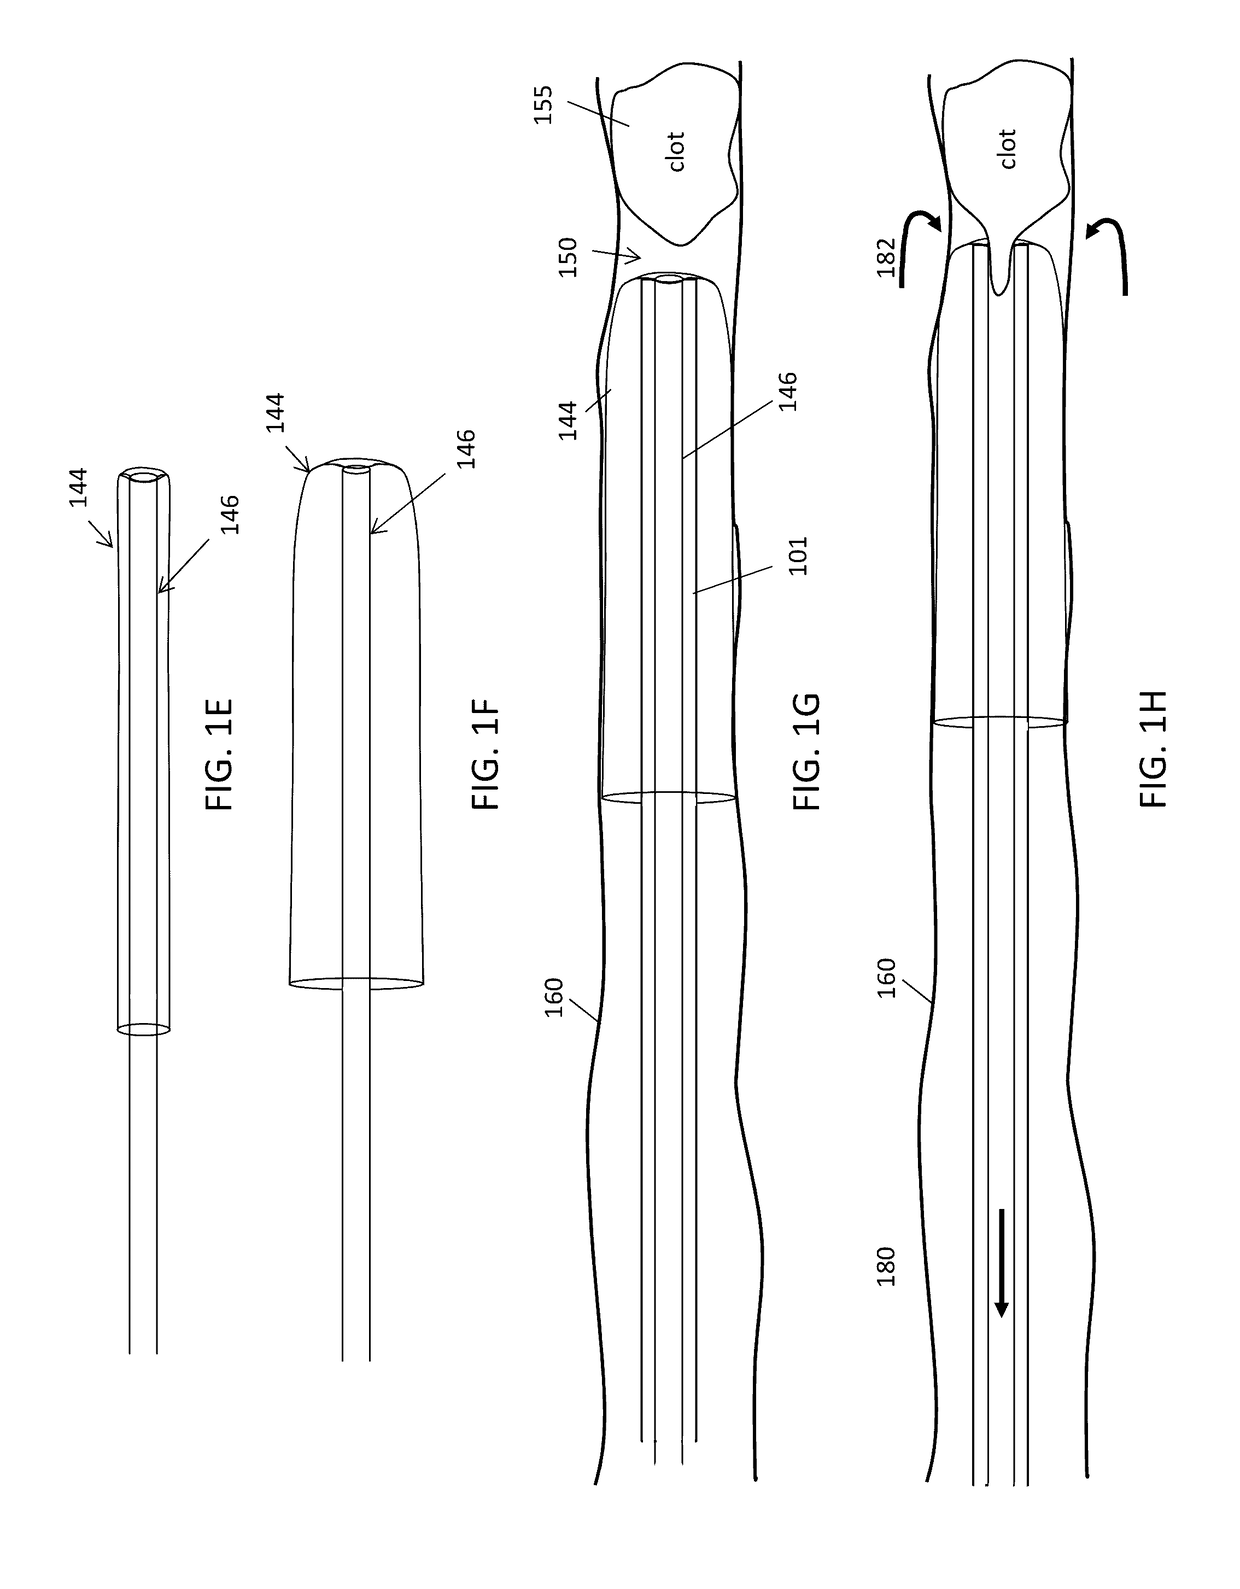 Mechanical thrombectomy apparatuses and methods